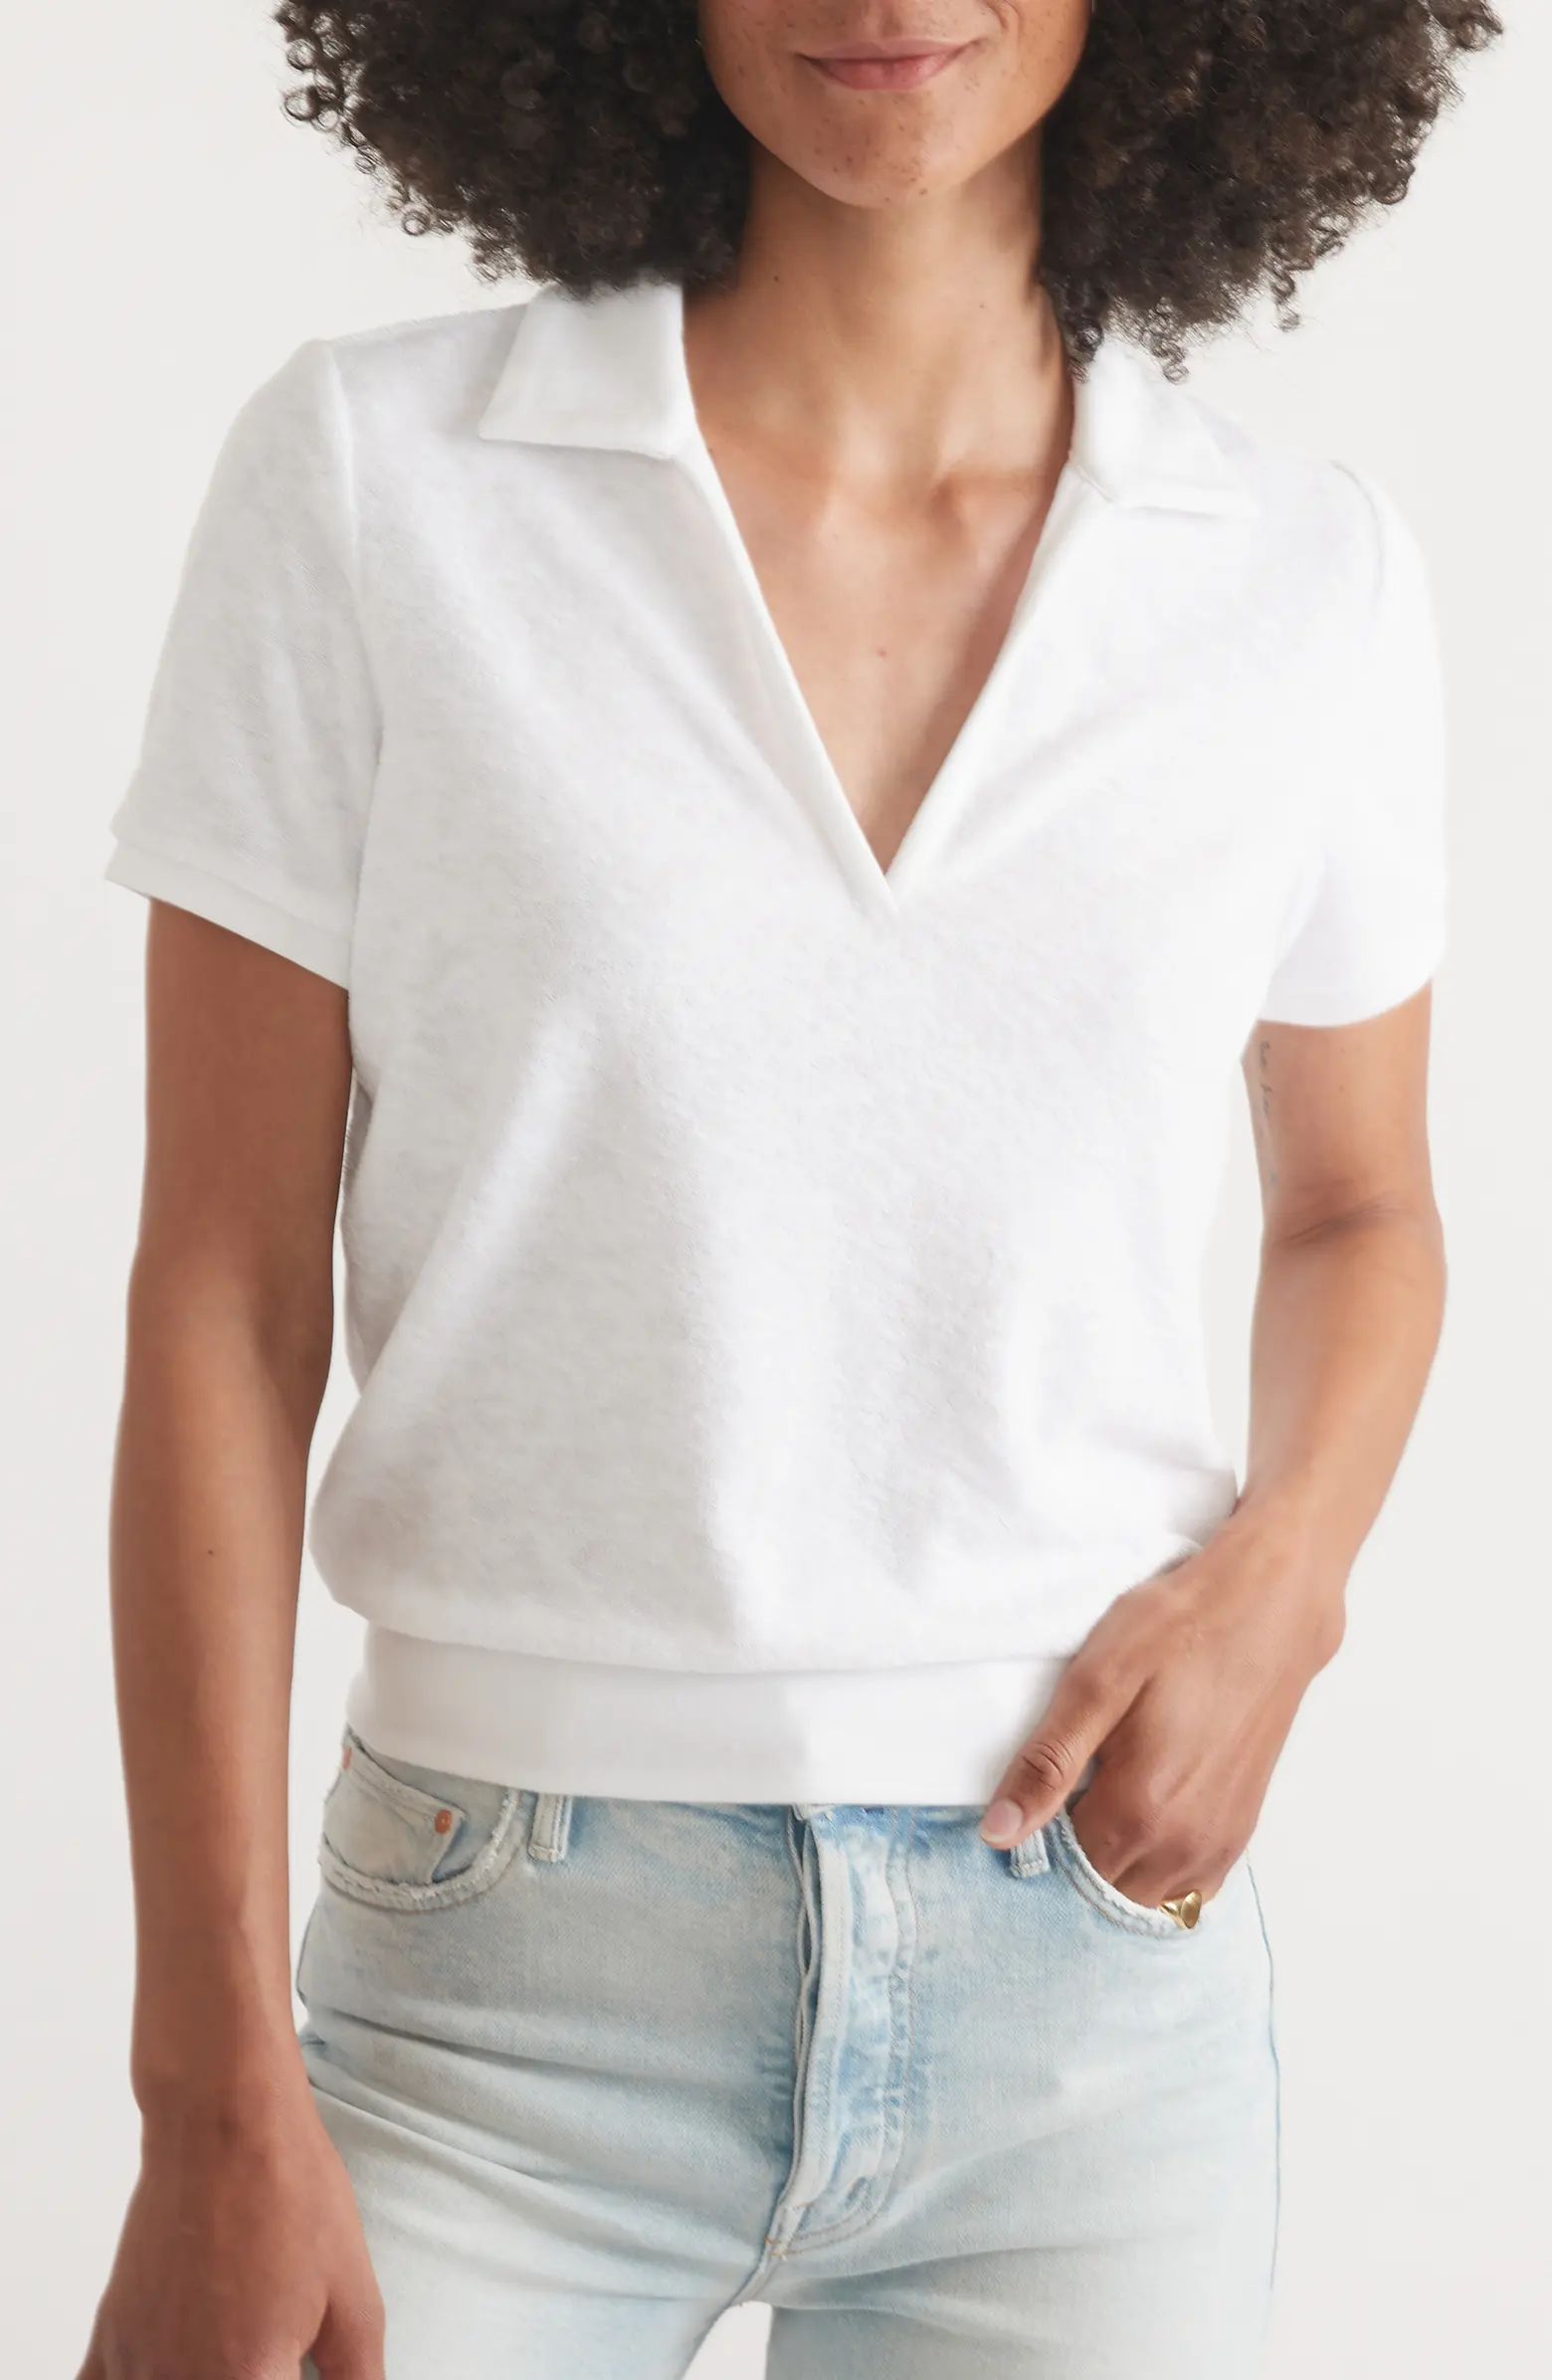 Marine Layer Terry Cloth Polo | Nordstrom | Nordstrom